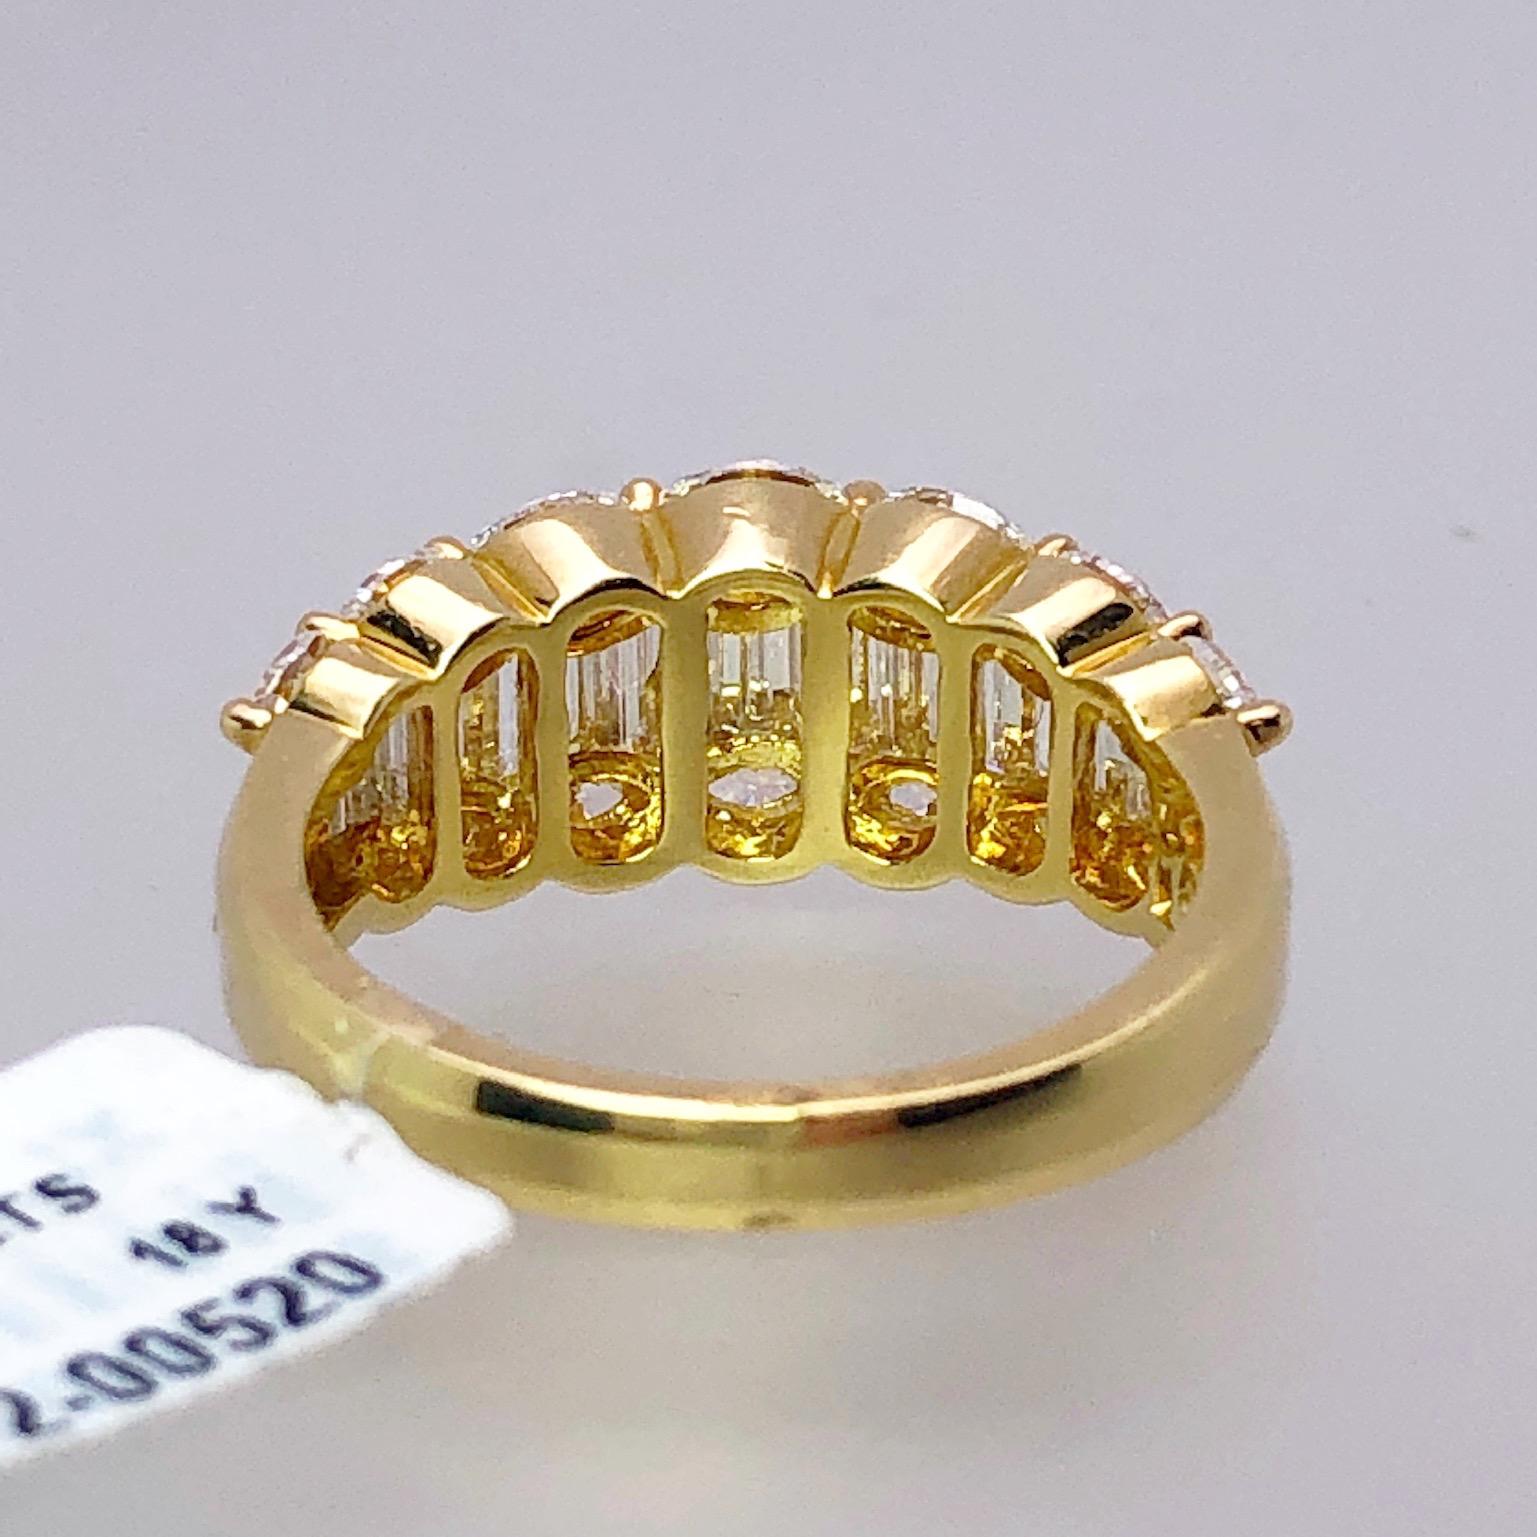 Nova 18 Karat Yellow Gold, 2.33 Carat Baguette and Marquise Diamond Ring For Sale 1